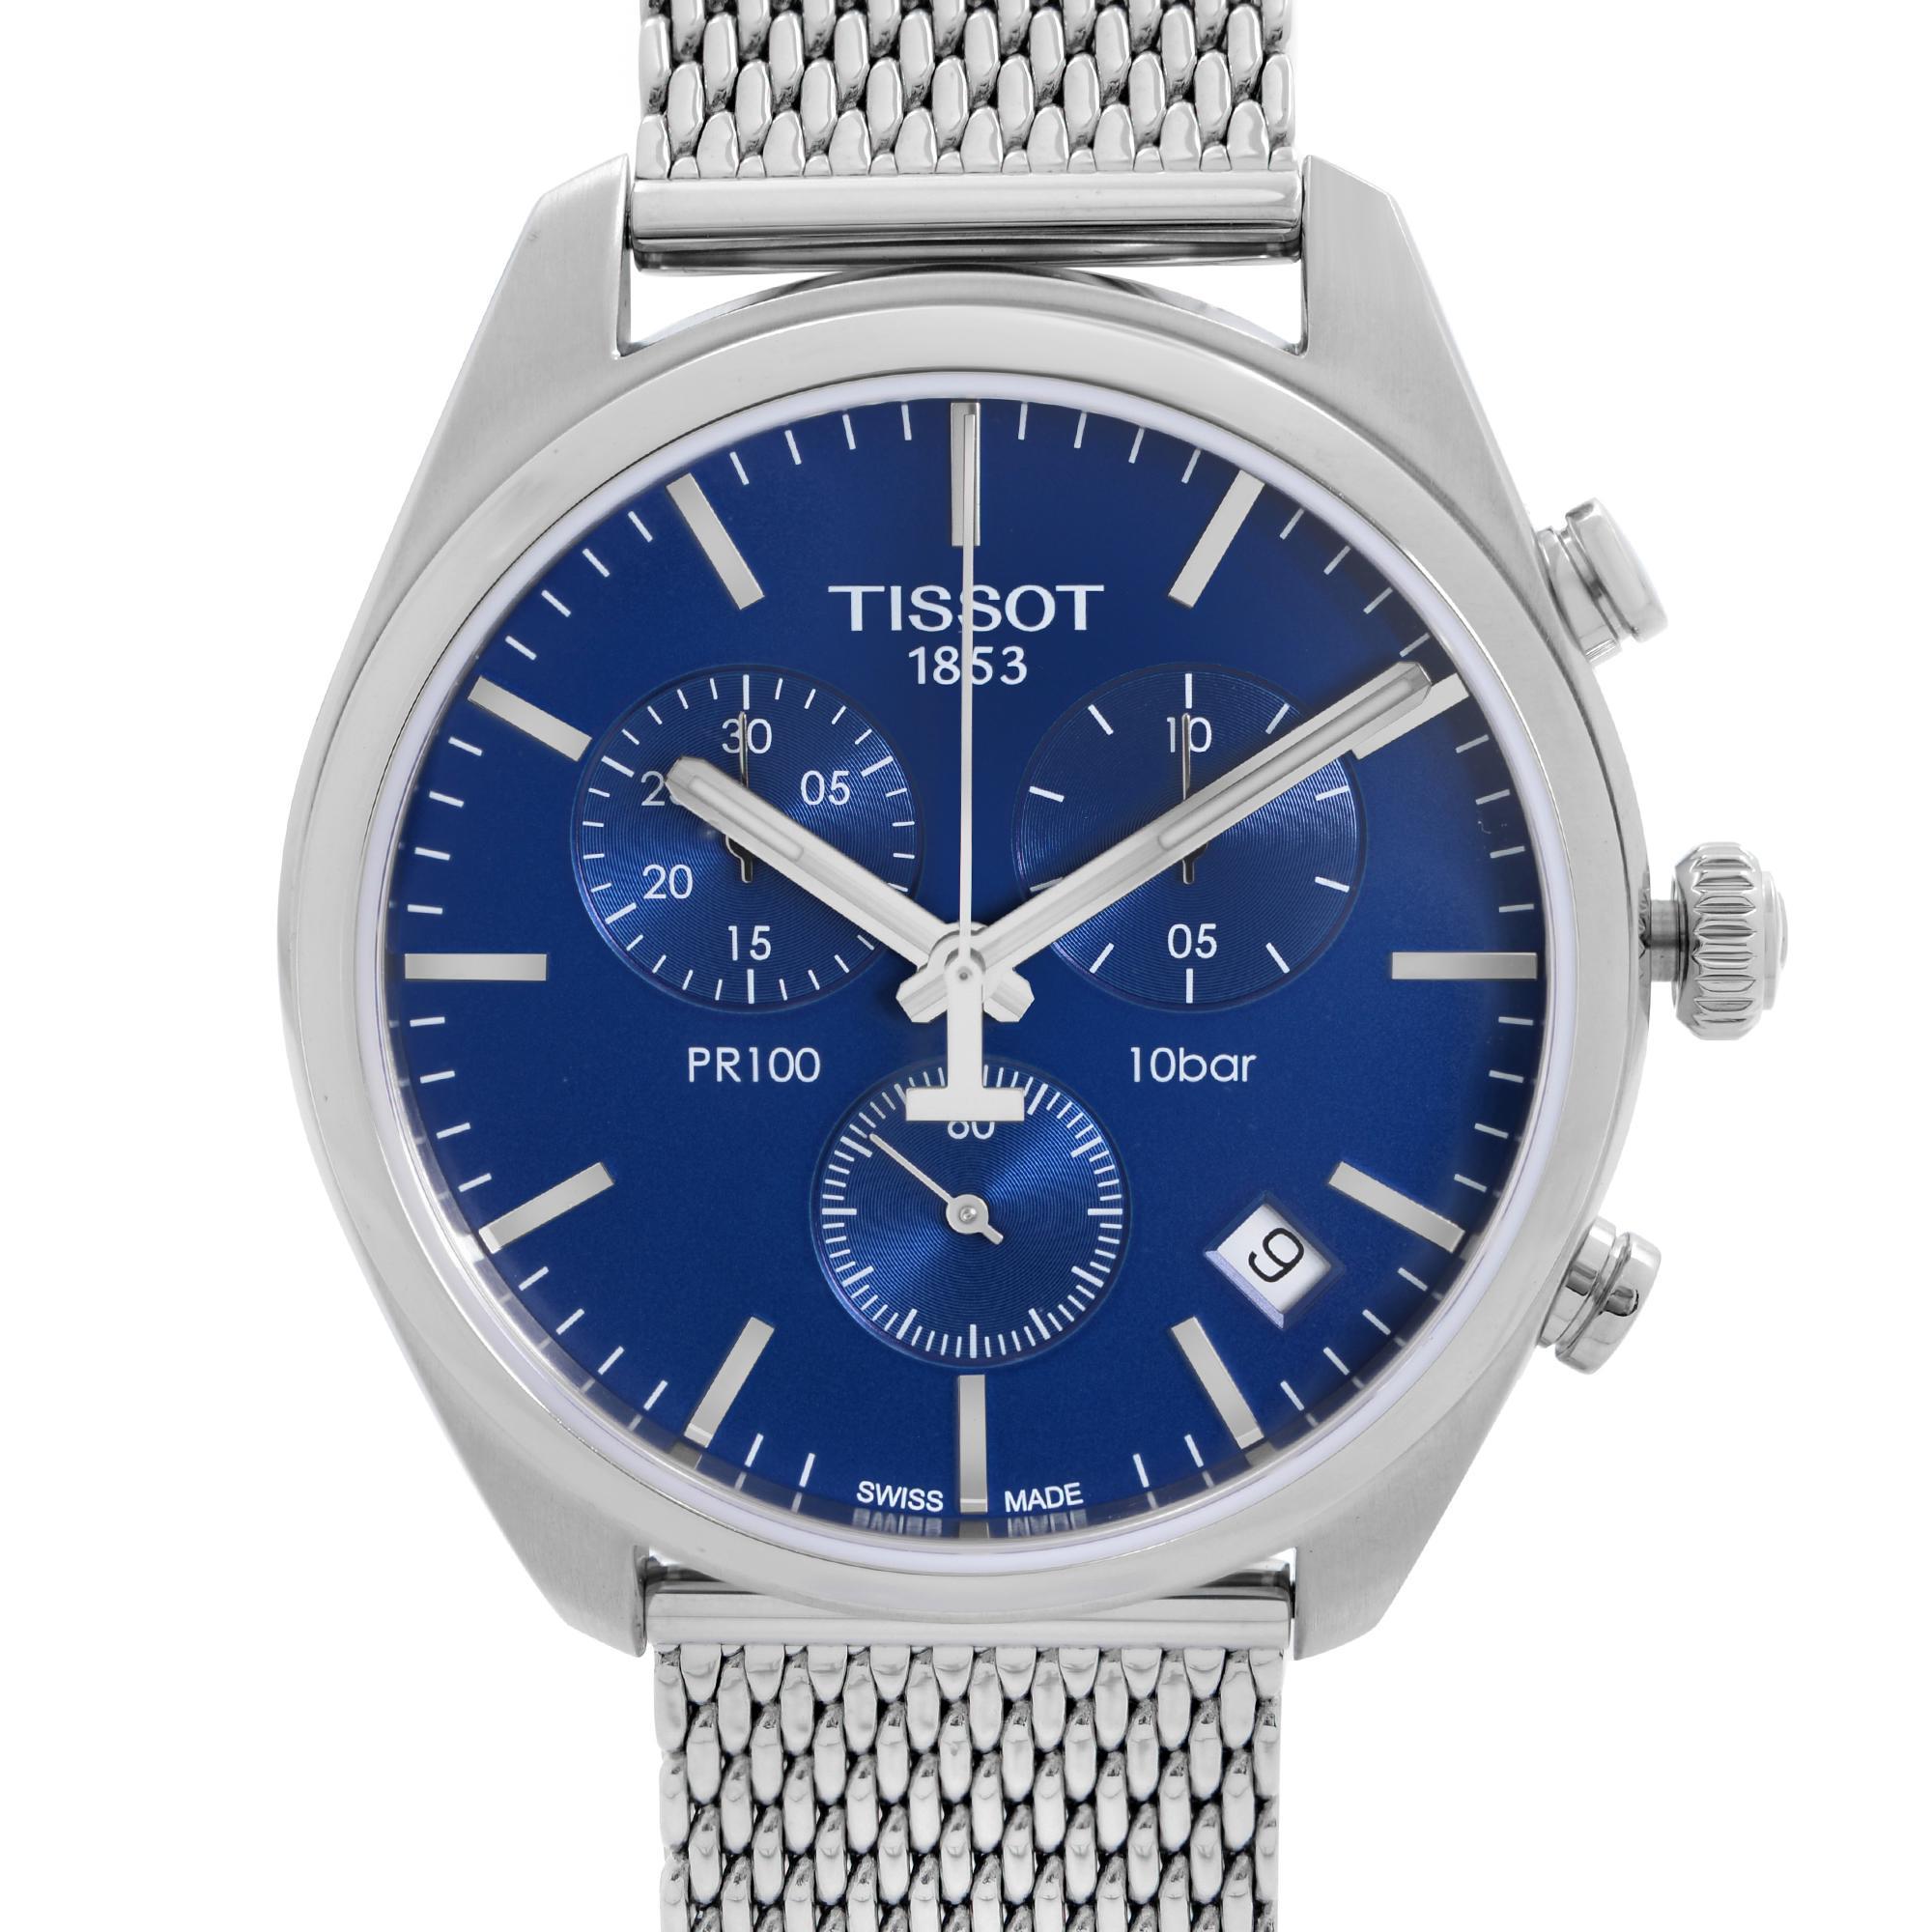 Display Model Tissot PR 100 Steel Chronograph Blue Dial Mens Quartz Watch T101.417.11.041.00. This Beautiful Mens Timepiece is Powered By a Quartz Battery Movement and Features: Stainless Steel Case and Bracelet, Fixed Stainless Steel Bezel, Blue